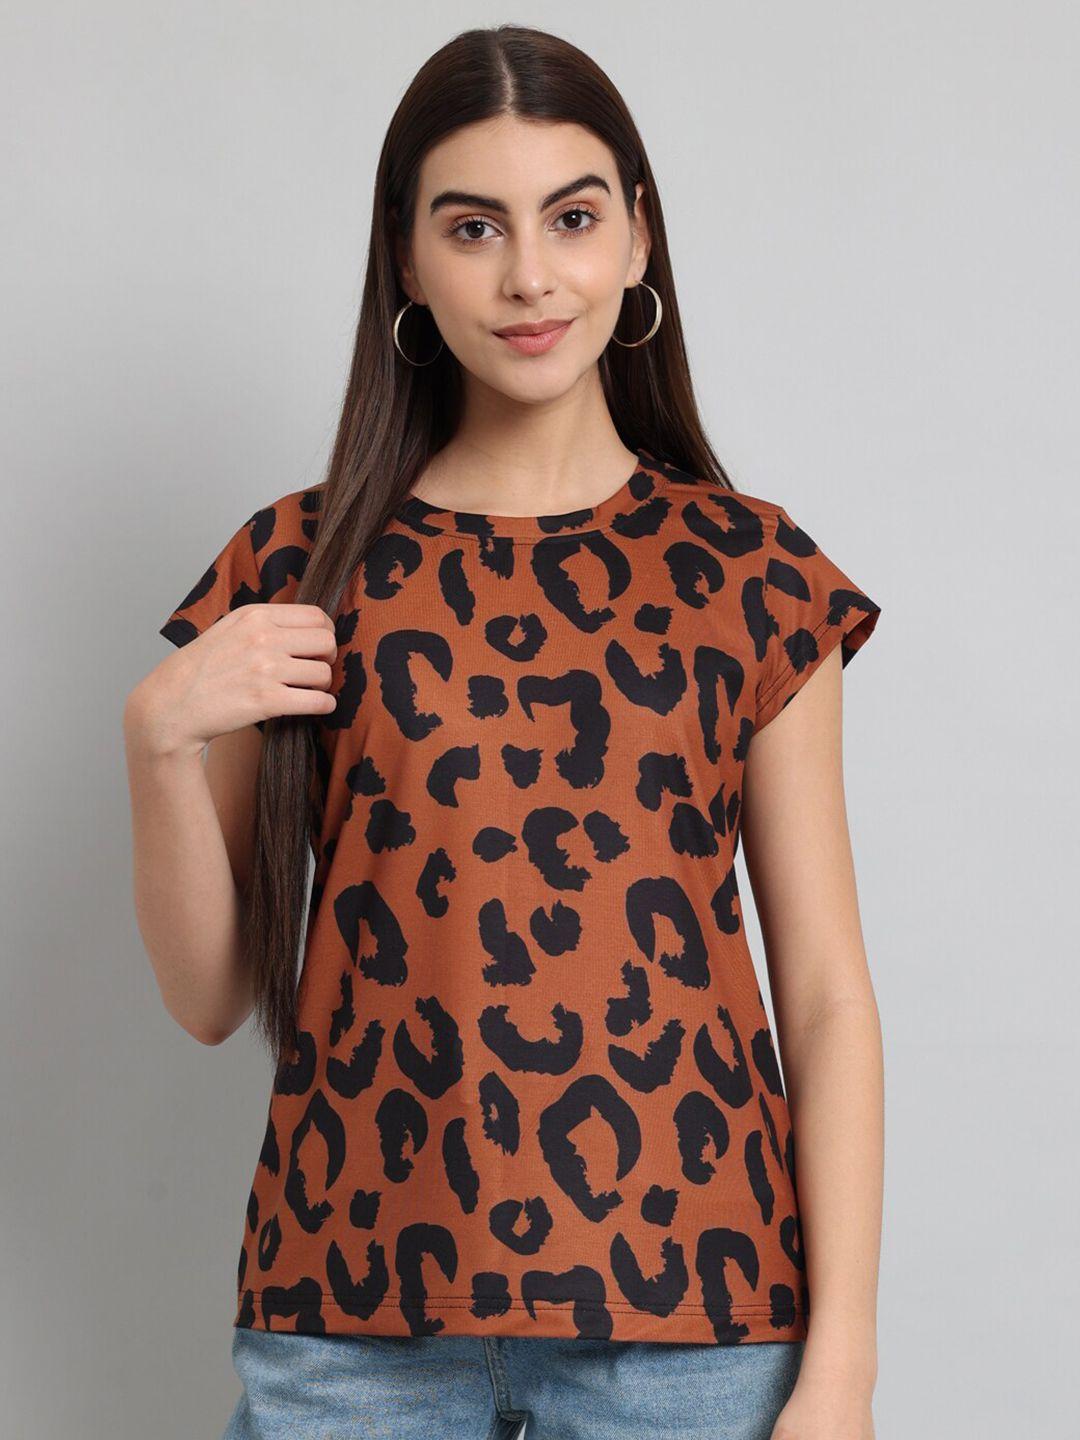 just wow animal printed cotton t-shirt